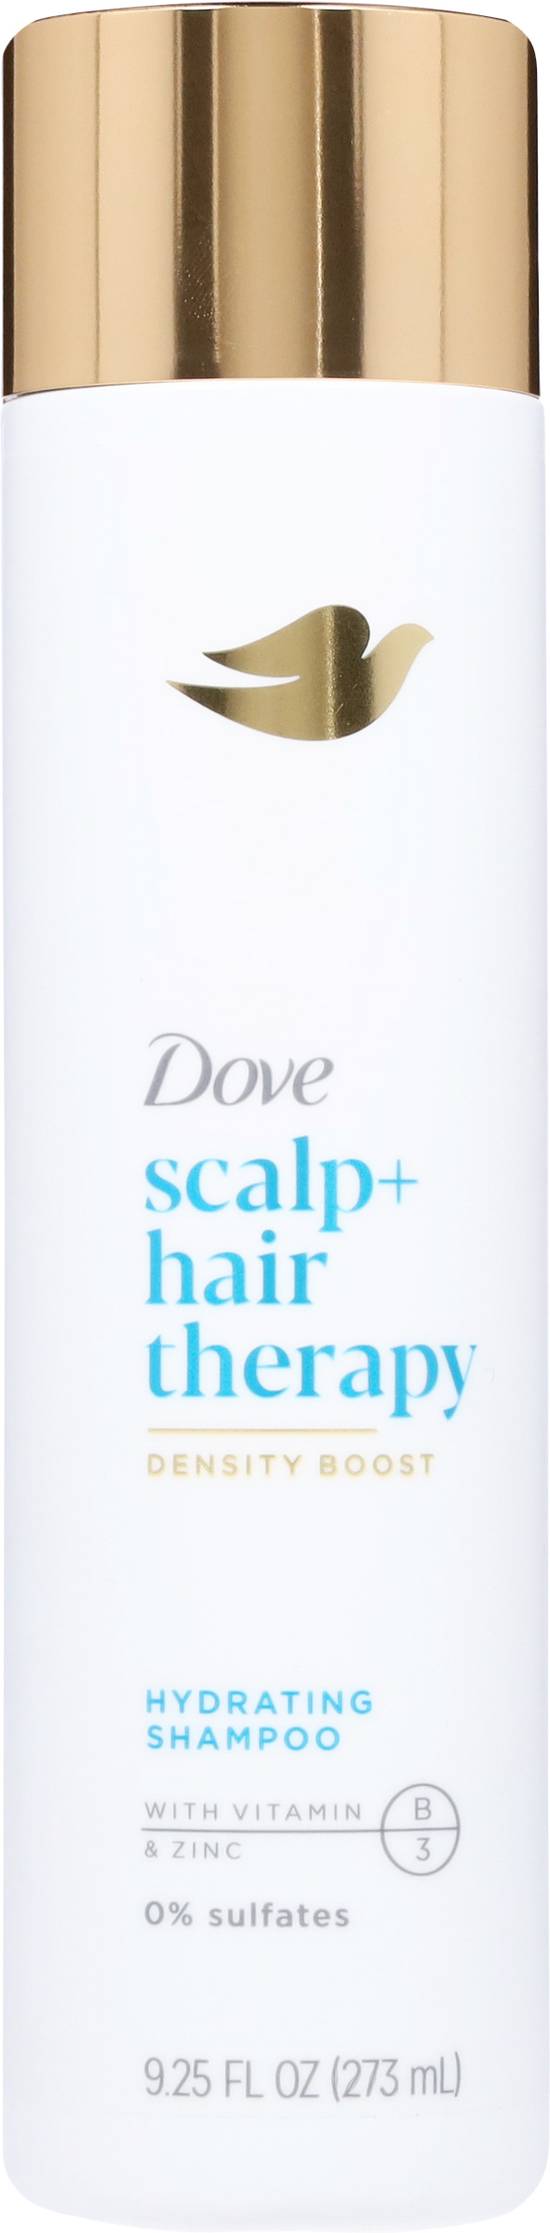 Dove Hydrating Shampoo Scalp & Hair Therapy